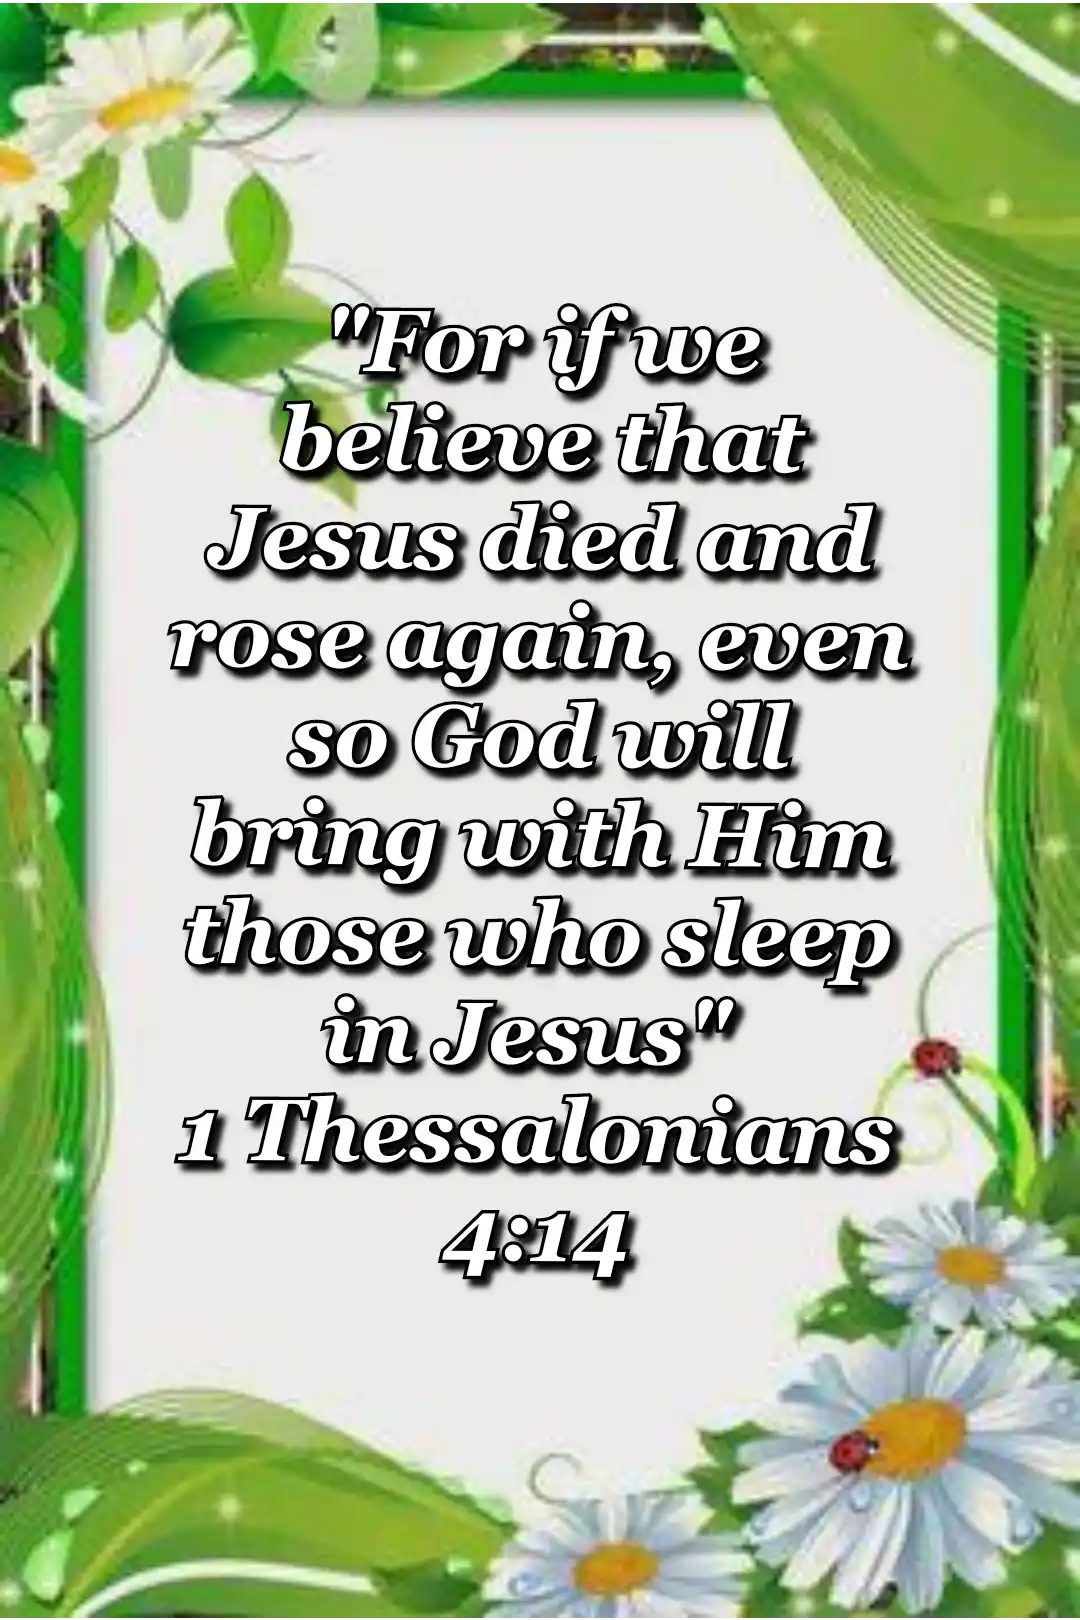 Bible-Verses_about_death-Image (1 Thessalonians 4:14 )